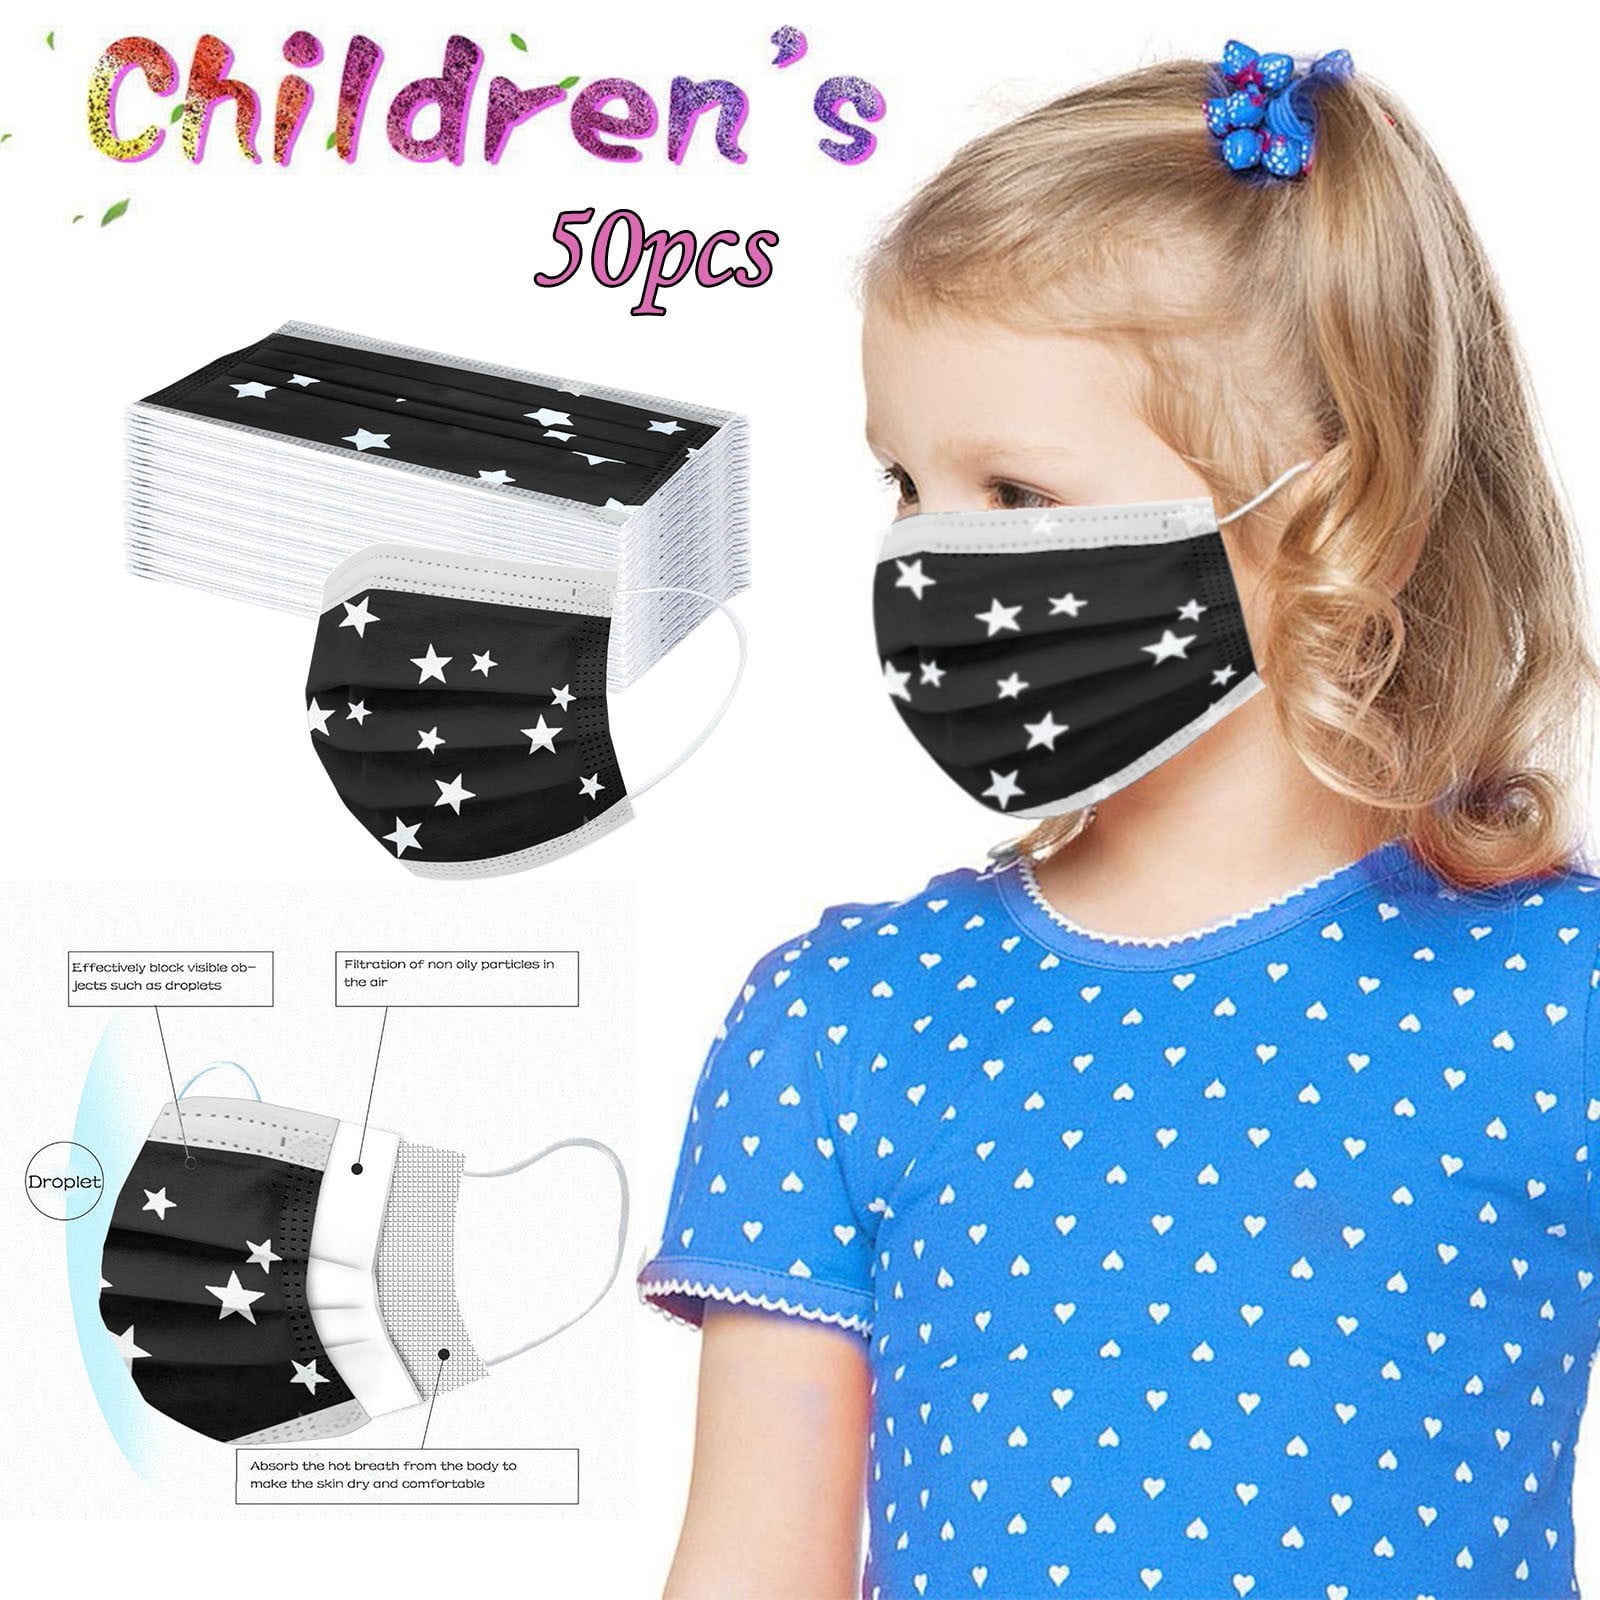 Dust-Proof US Stock Children Cotton Face Bandanas for Kids Outdoor Activities 20 Pcs Particles Filter Breathing Sheet 5 Pcs Facial Protective